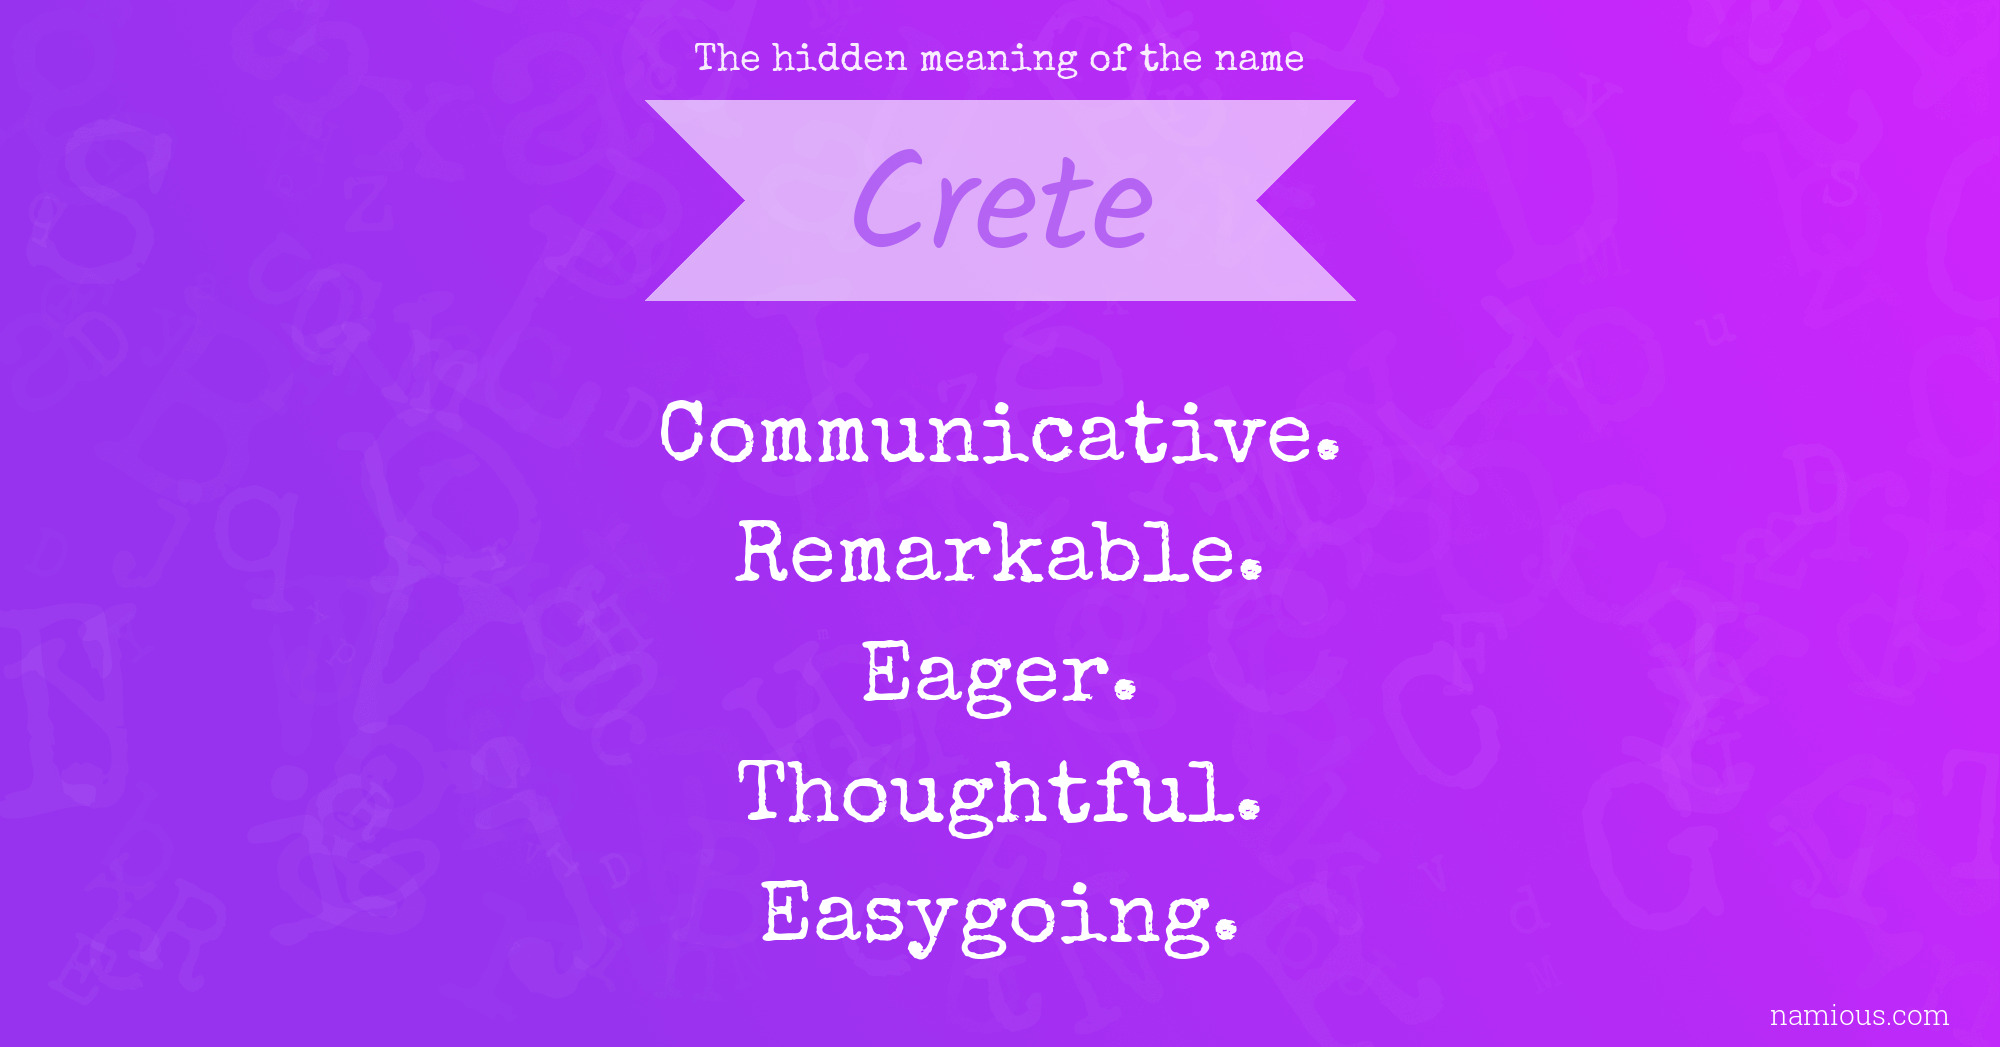 The hidden meaning of the name Crete